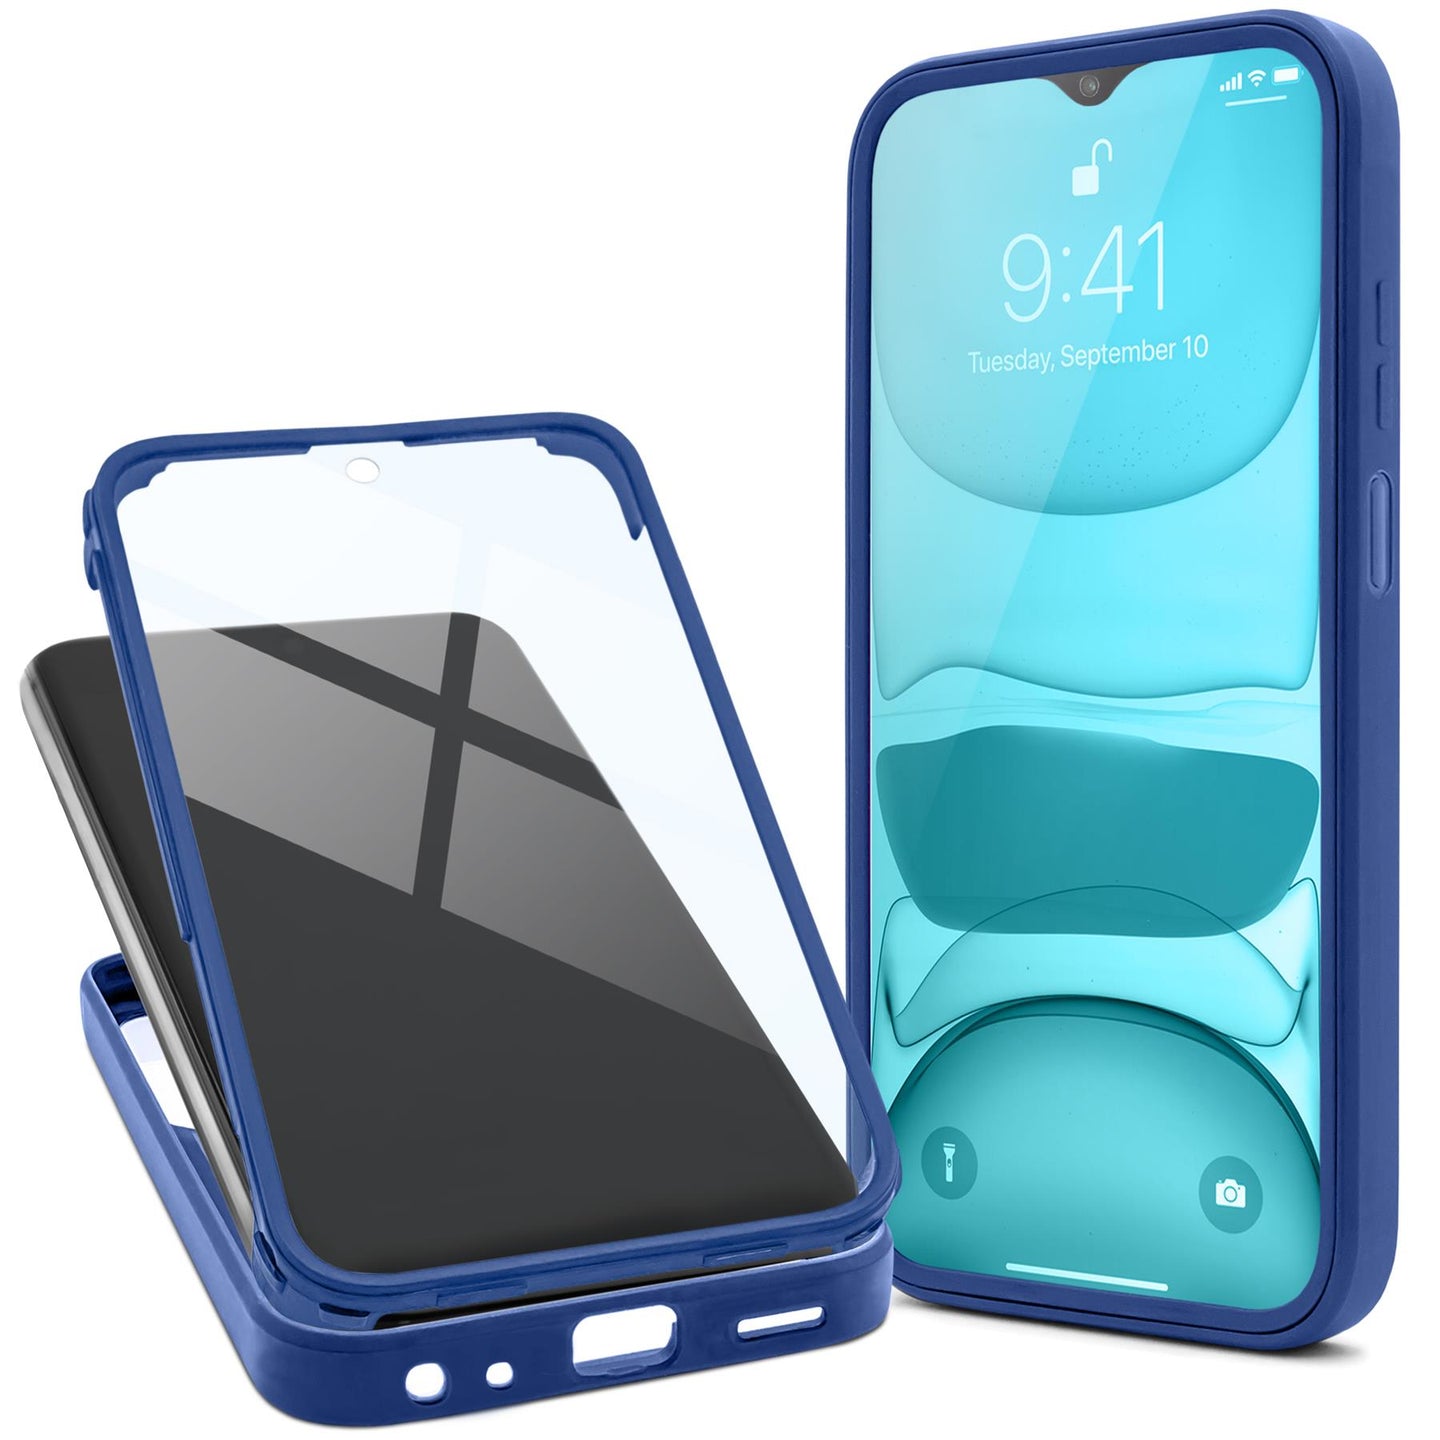 Moozy 360 Case for Samsung A22 5G - Blue Rim Transparent Case, Full Body Double-sided Protection, Cover with Built-in Screen Protector